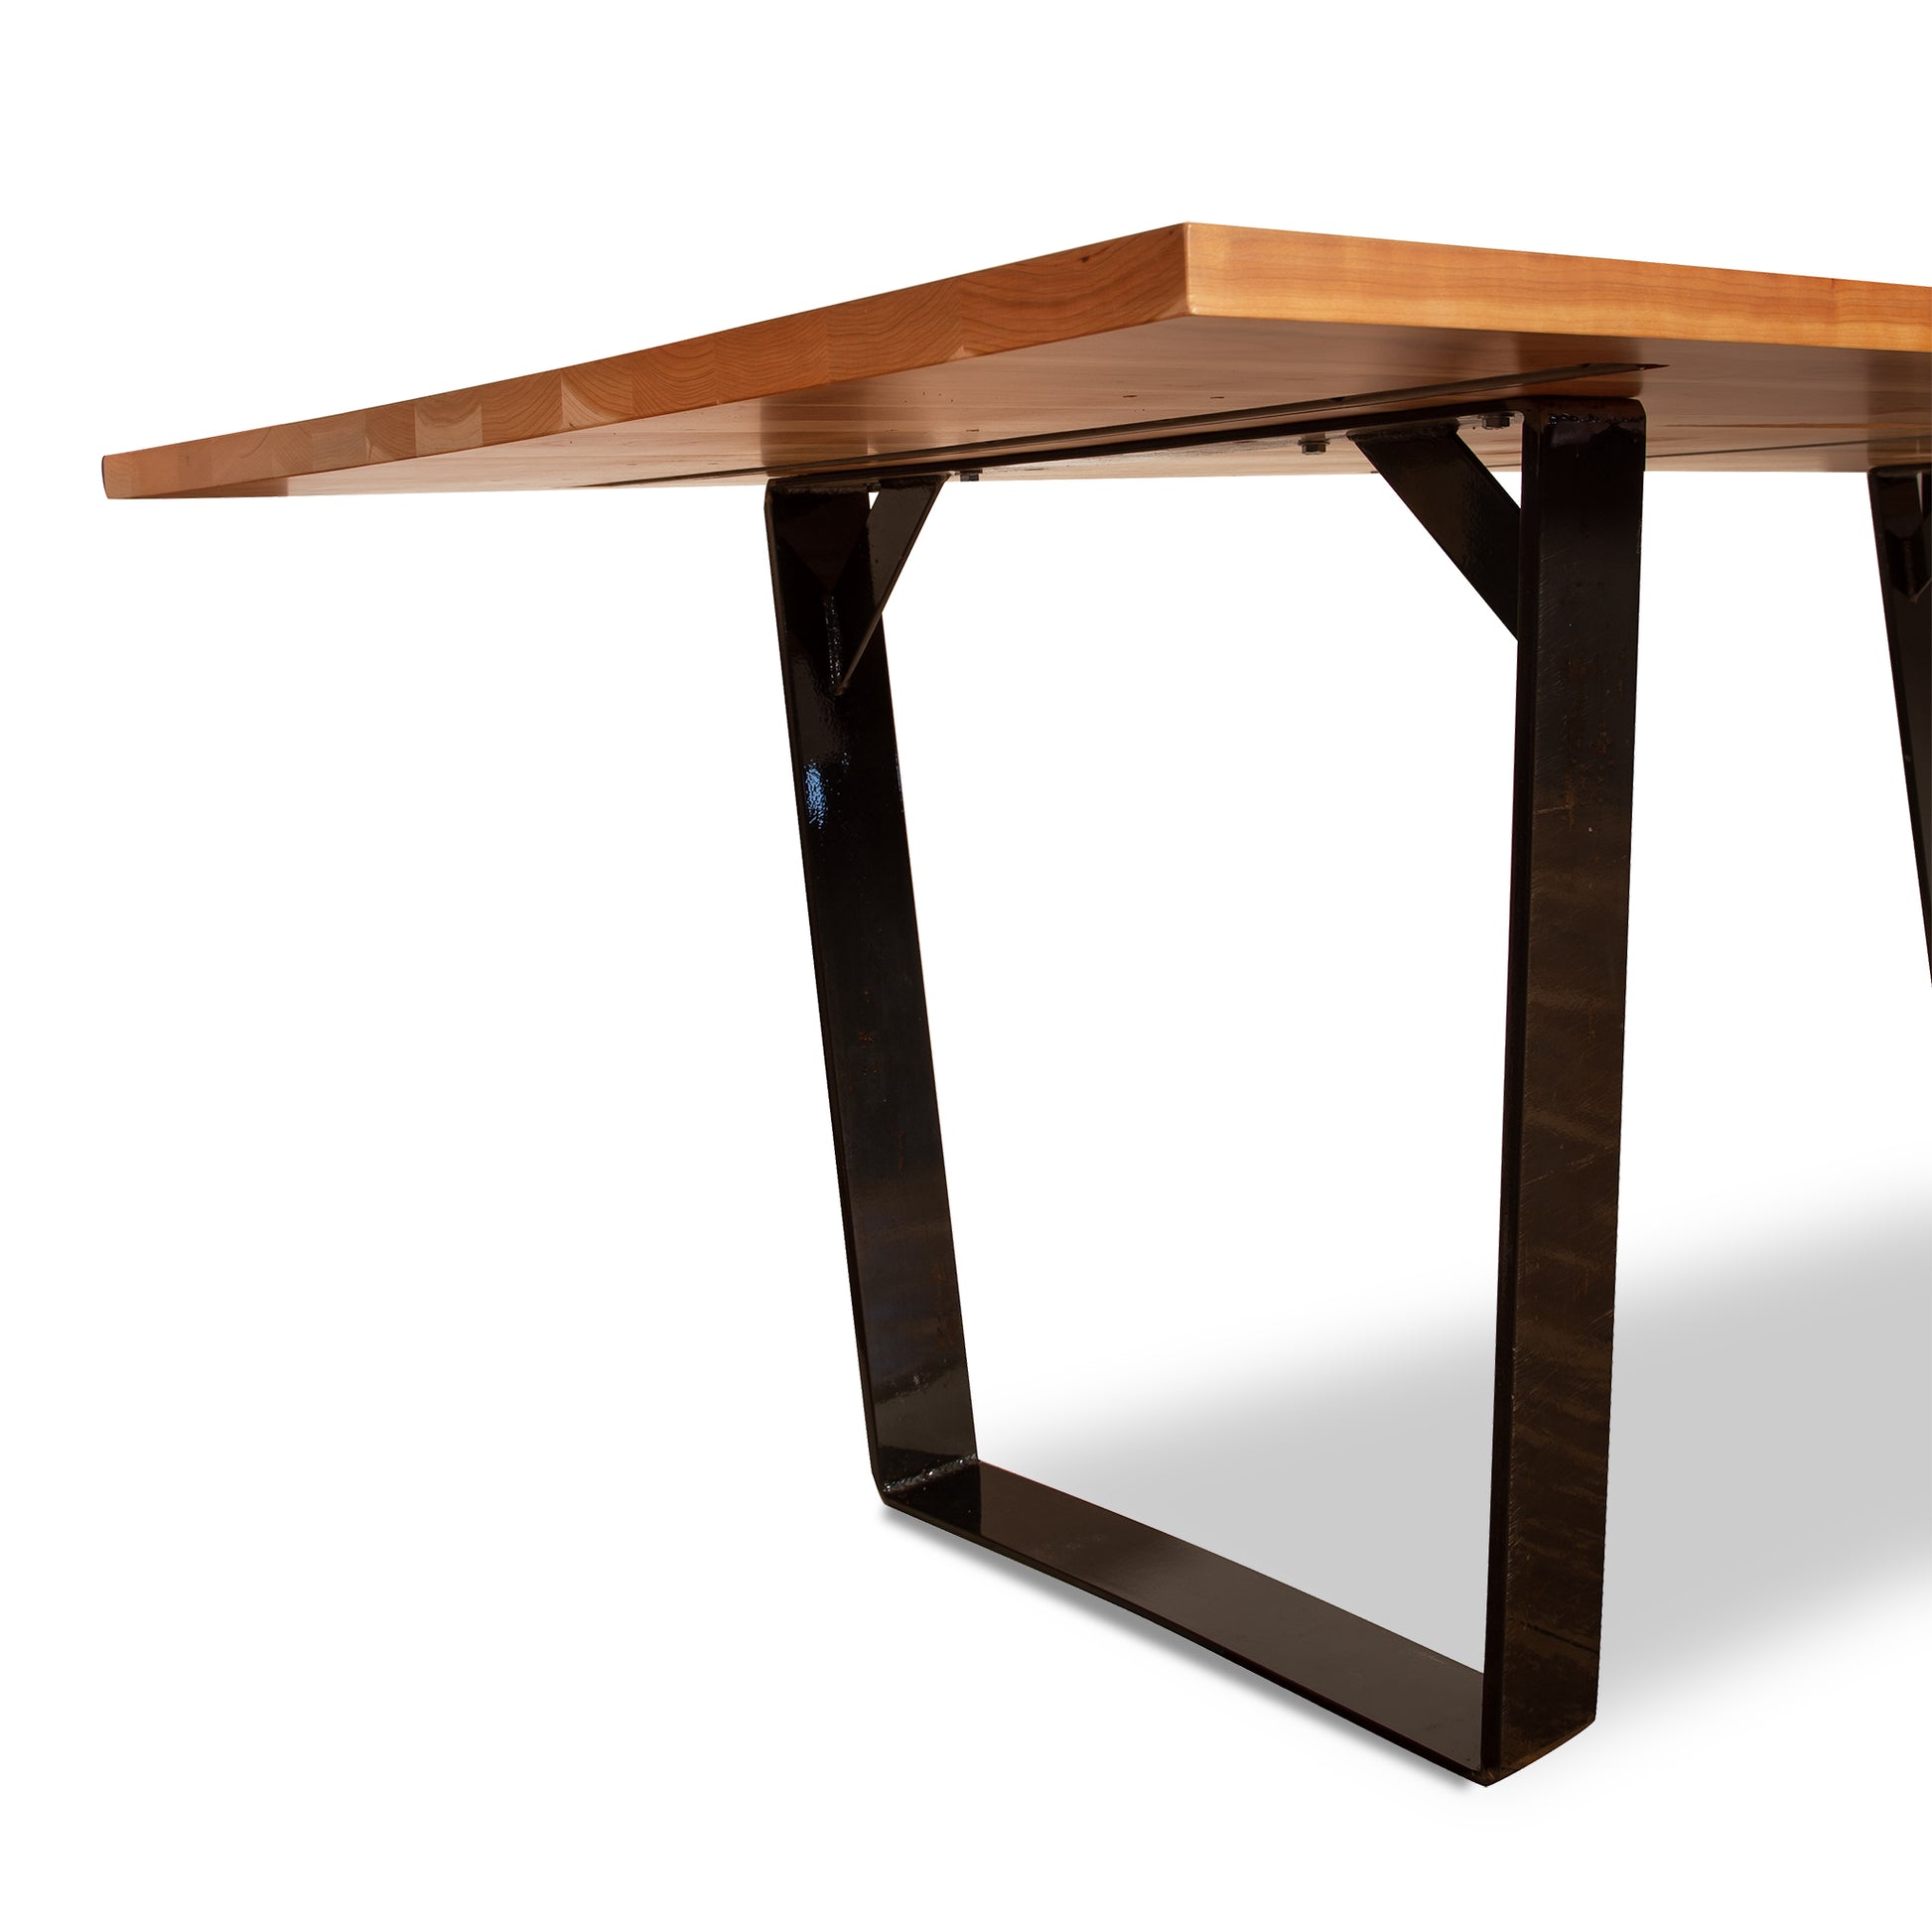 A Metropolitan Solid Top Dining Table with a metal base by Lyndon Furniture.